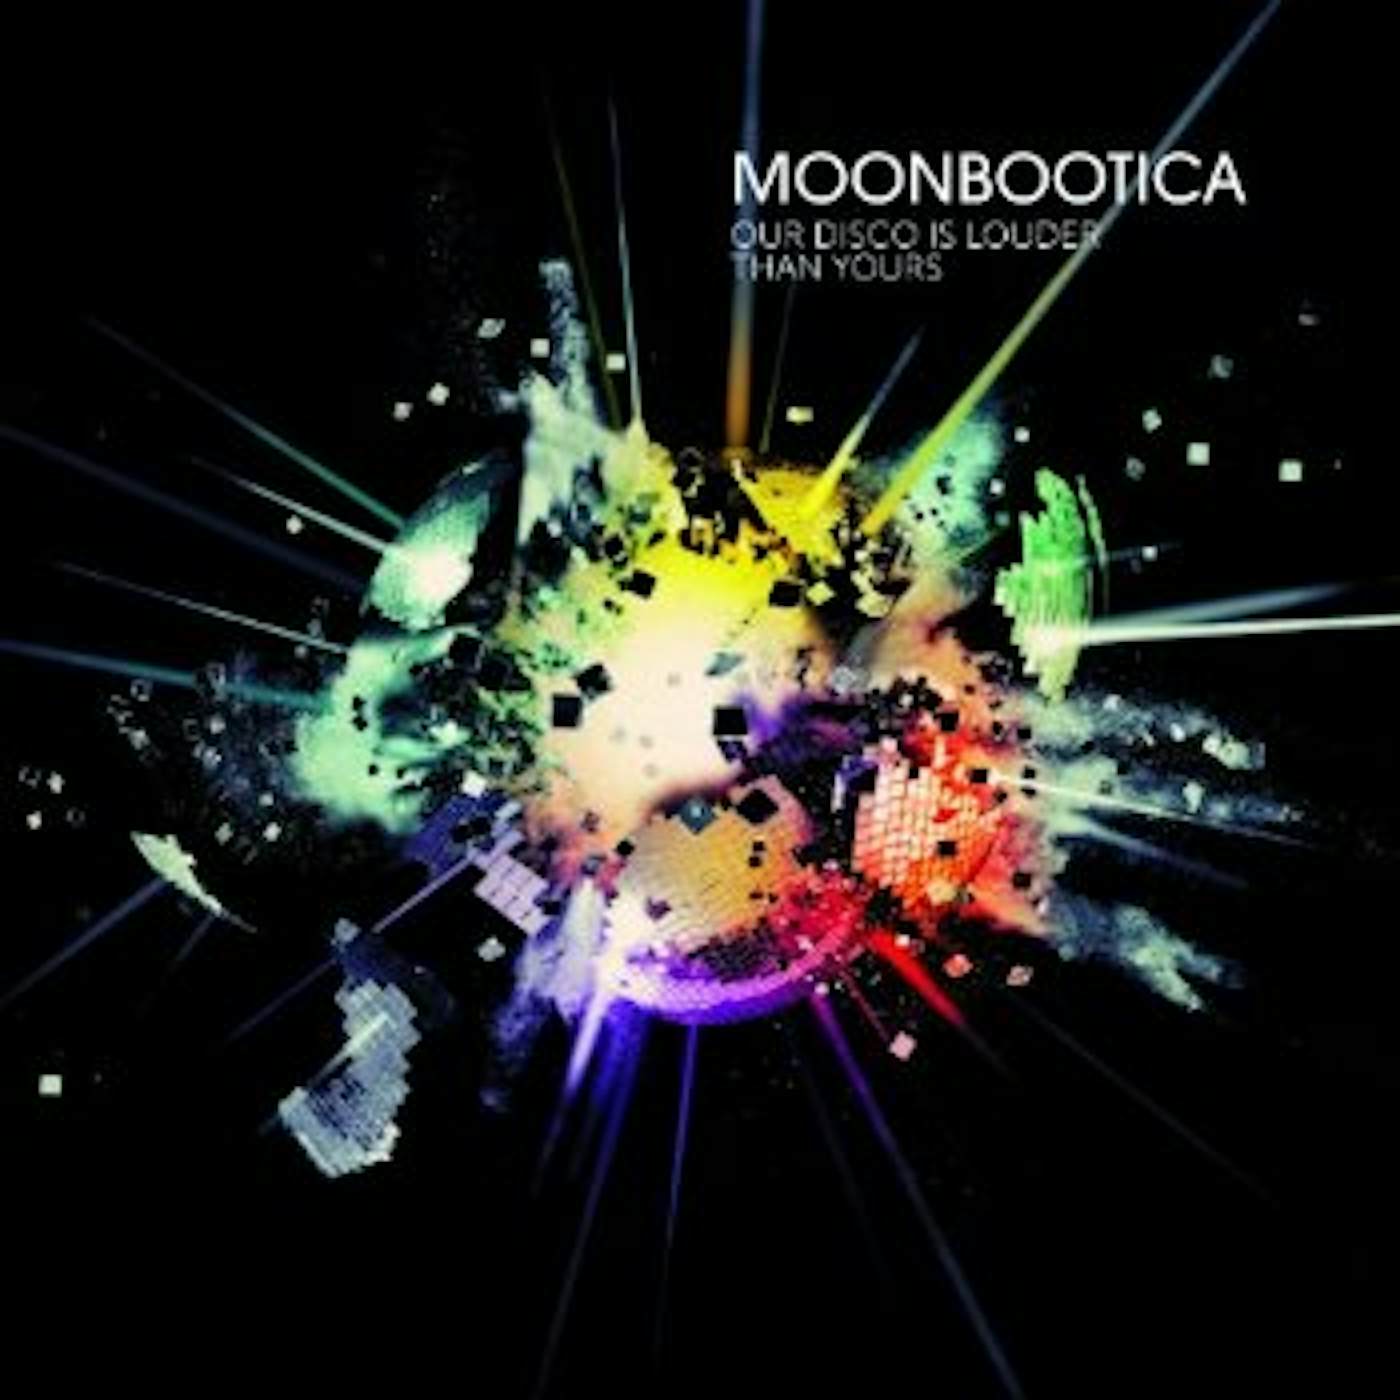 Moonbootica OUR DISCO IS LOUDER THAN YOURS CD